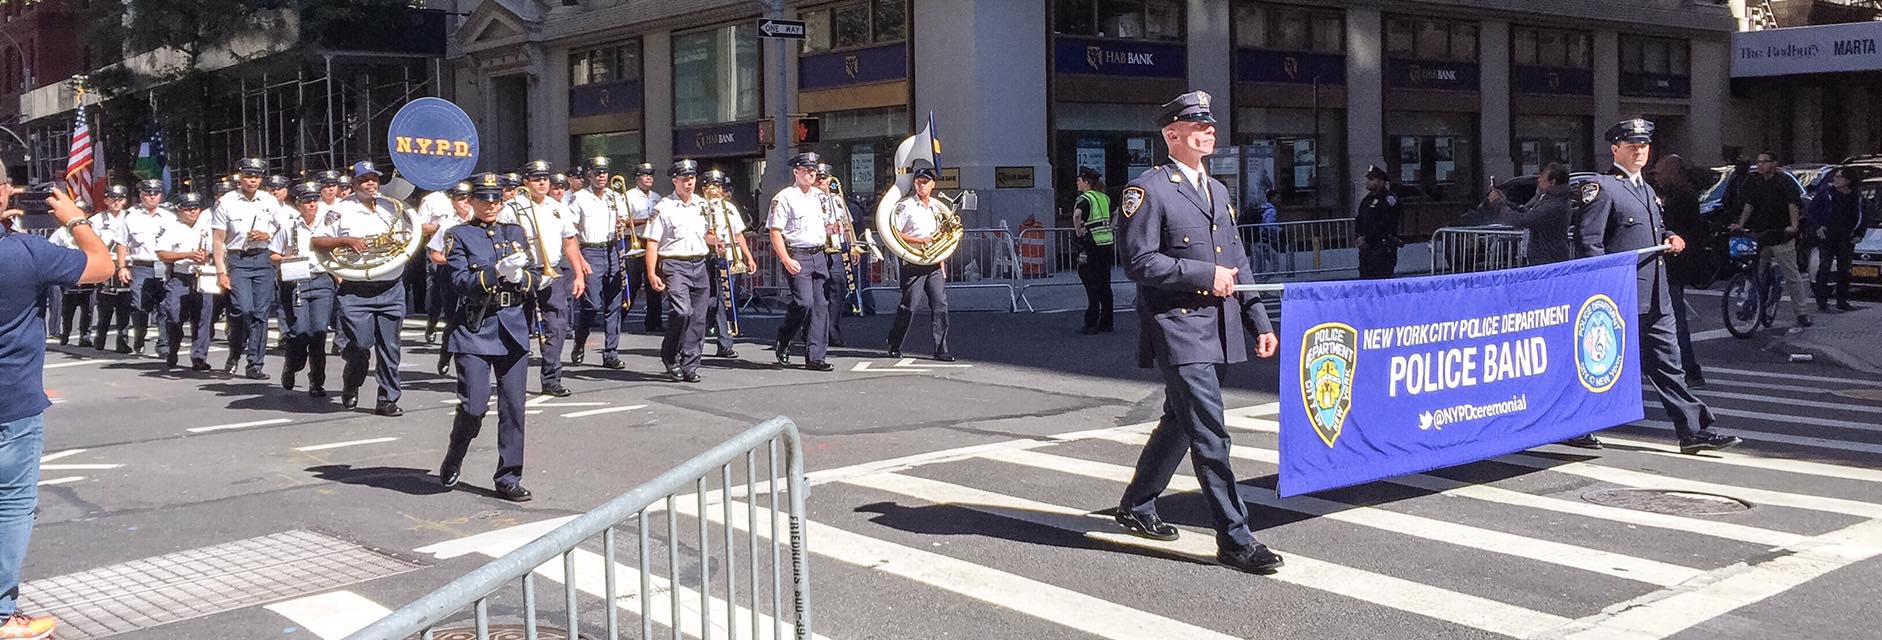 NYPD Marching Band